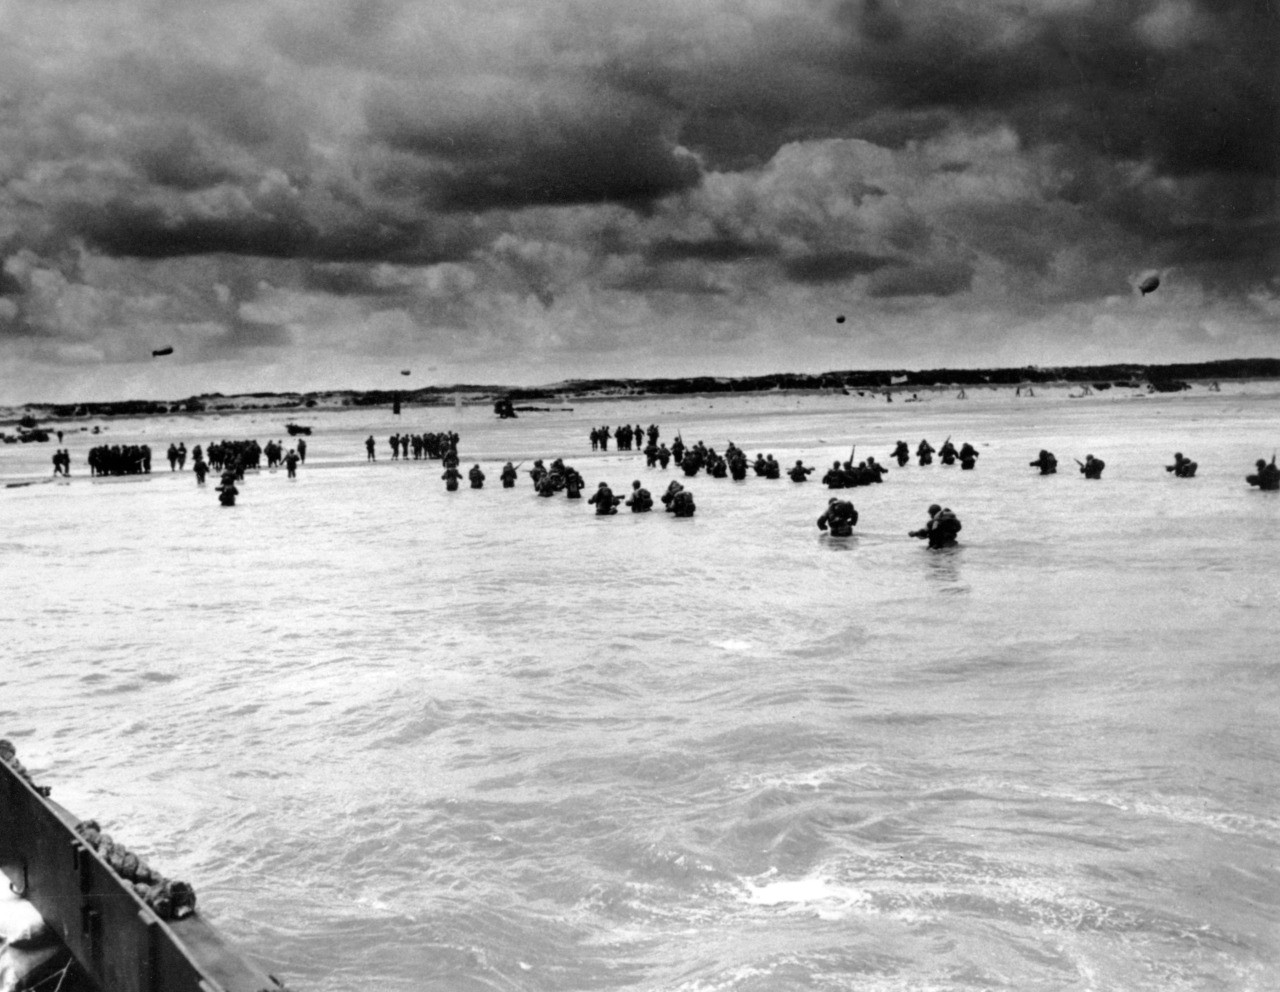 FILE - In this June 1944, file photo, U.S. reinforcements wade through the surf as they land at Normandy in the days following the Allies', D-Day invasion of occupied France. June 6, 2019, marks the 75th anniversary of D-Day, the assault that began the liberation of France and Europe from German occupation, leading to the end World War II. (U.S. Coast Guard via AP, File)